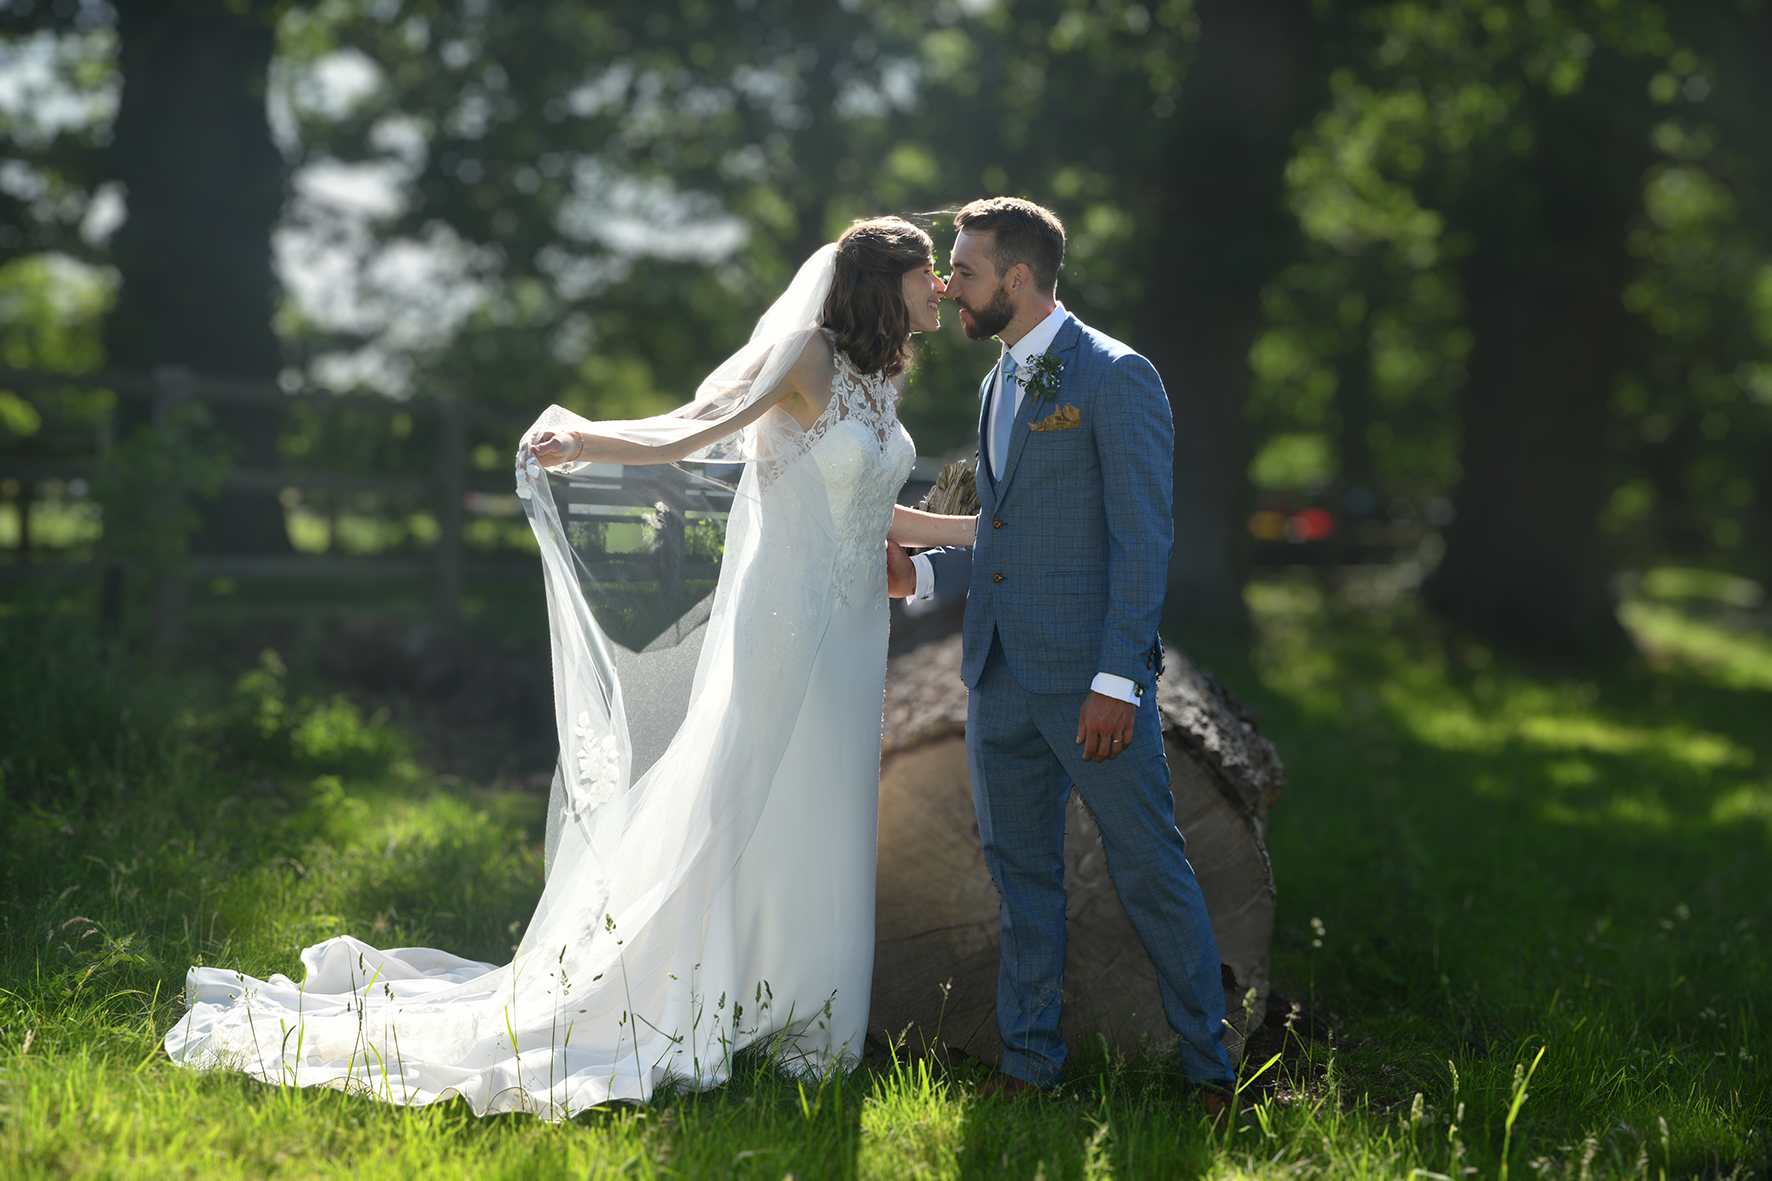 Wedding Photography in the garden at home